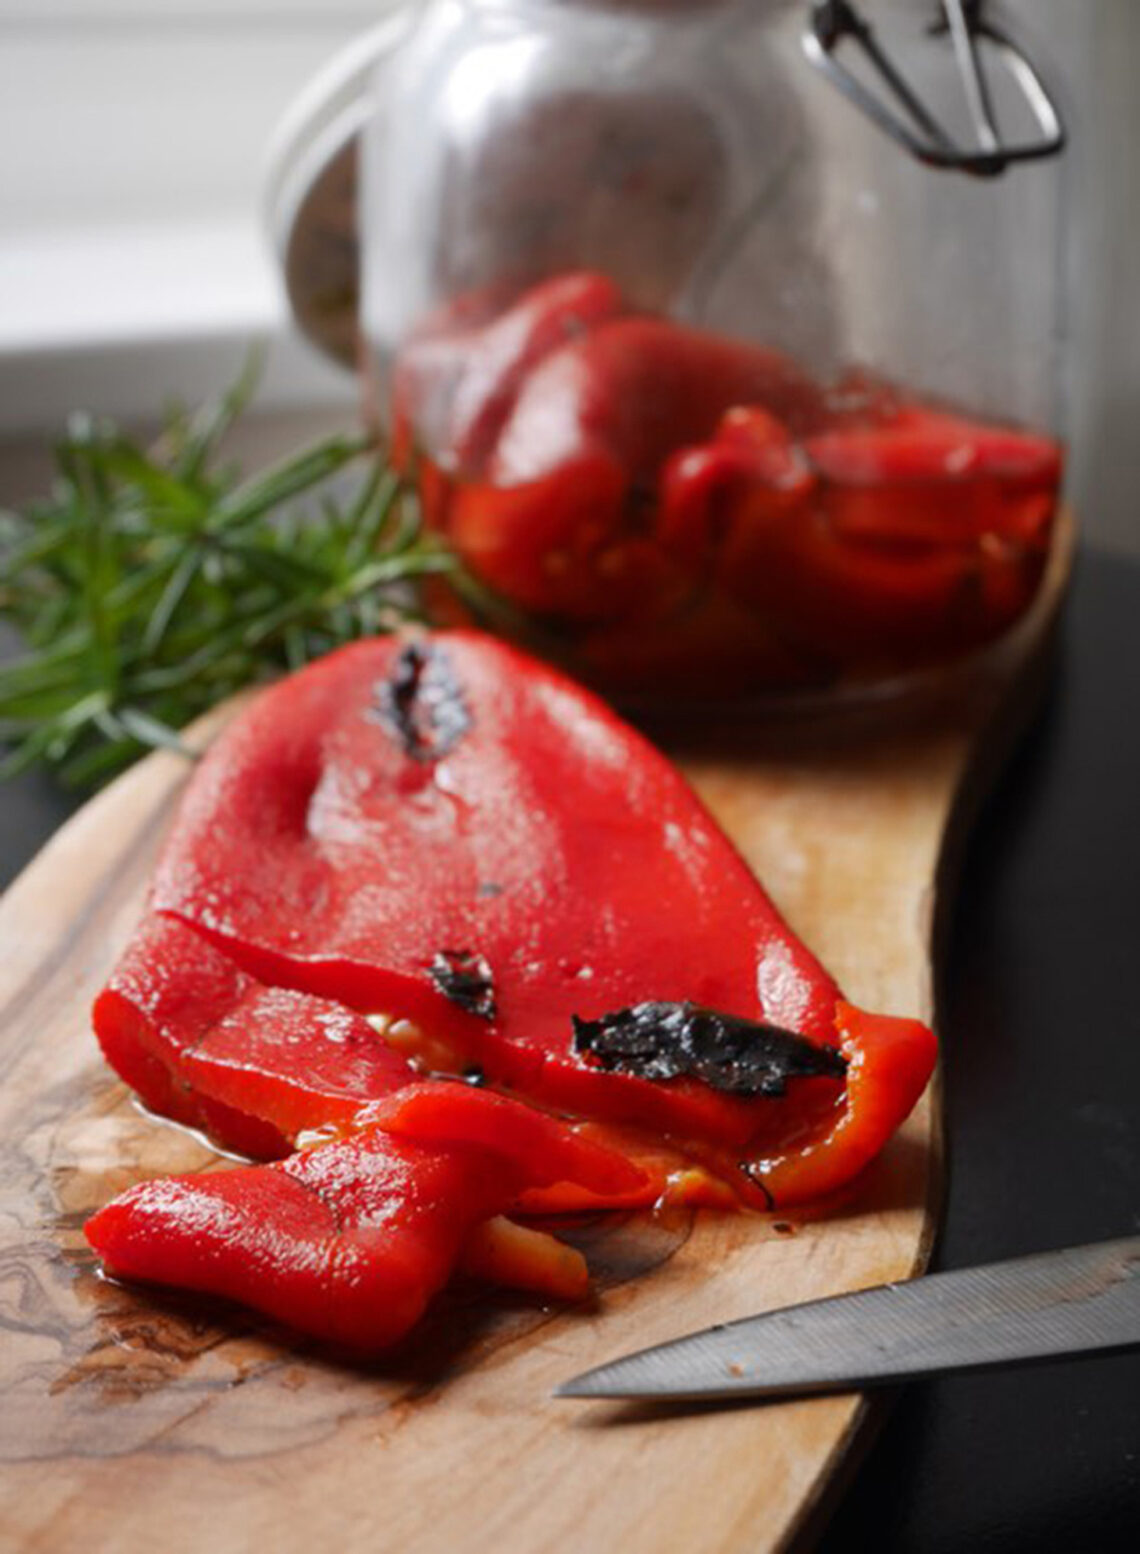 Honey-balsamic bell peppers with rosemary